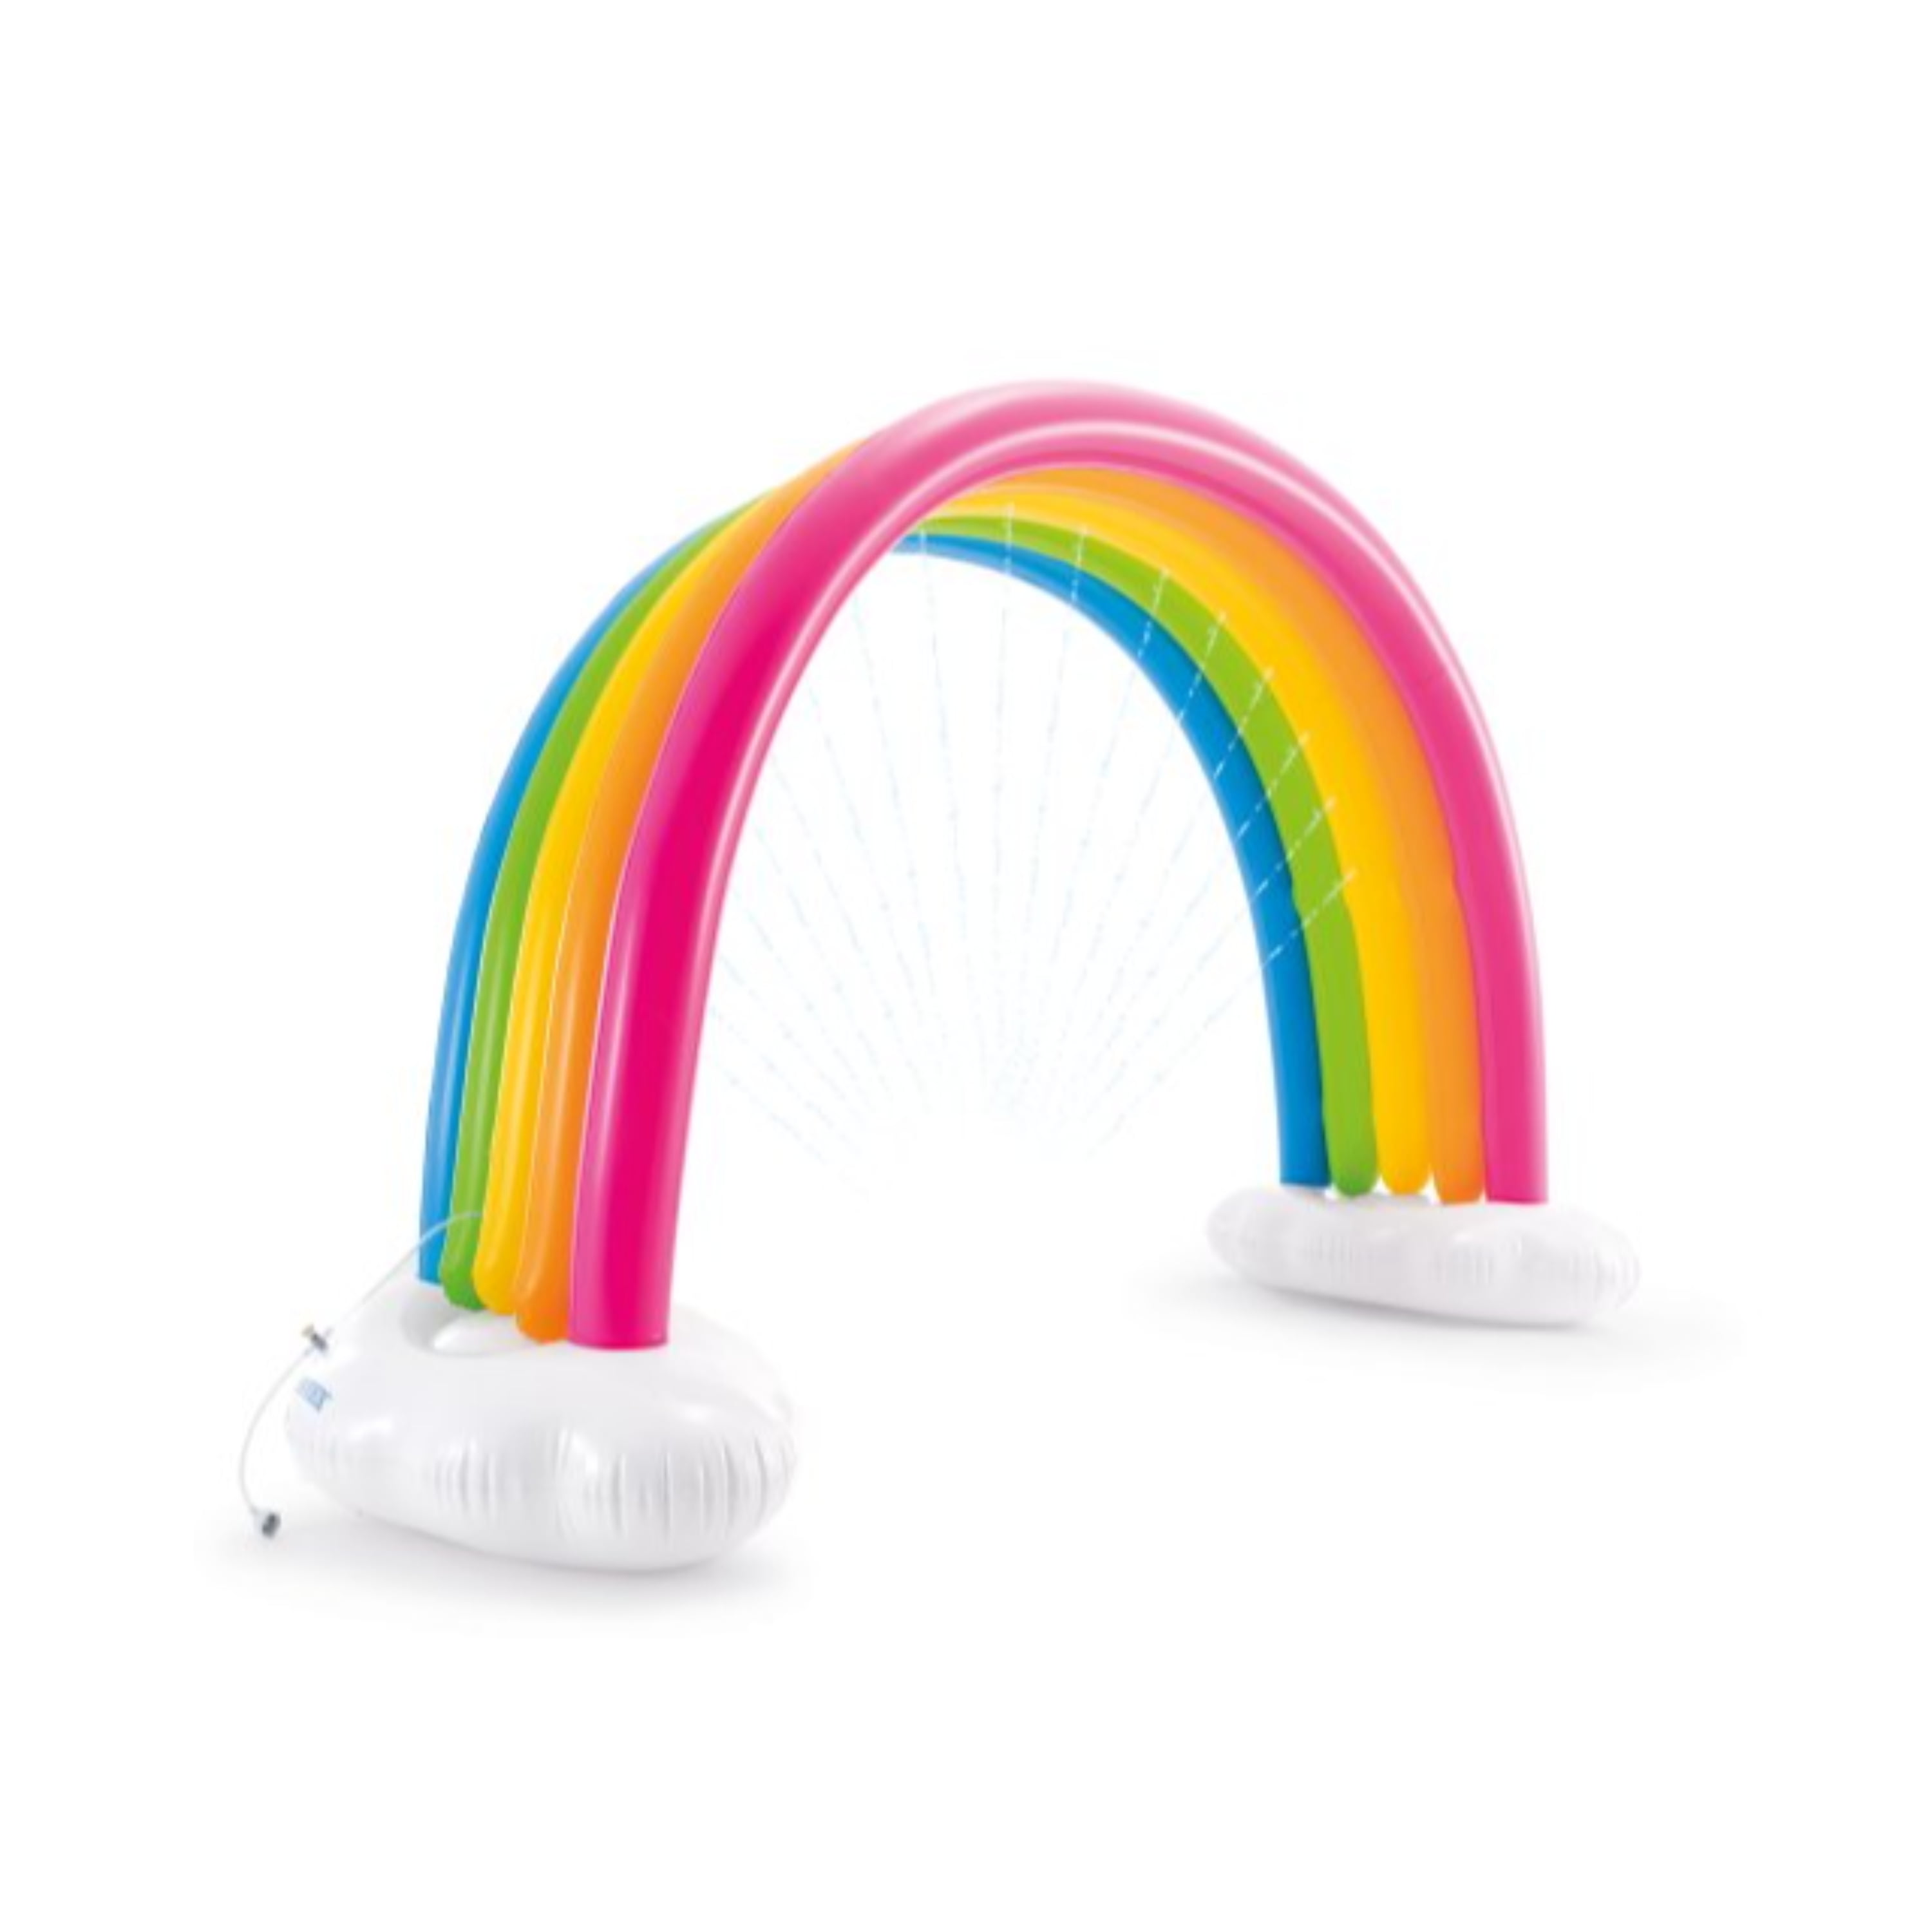 Picture of Ace Trading 8057207 Intex Rainbow Sprinkler